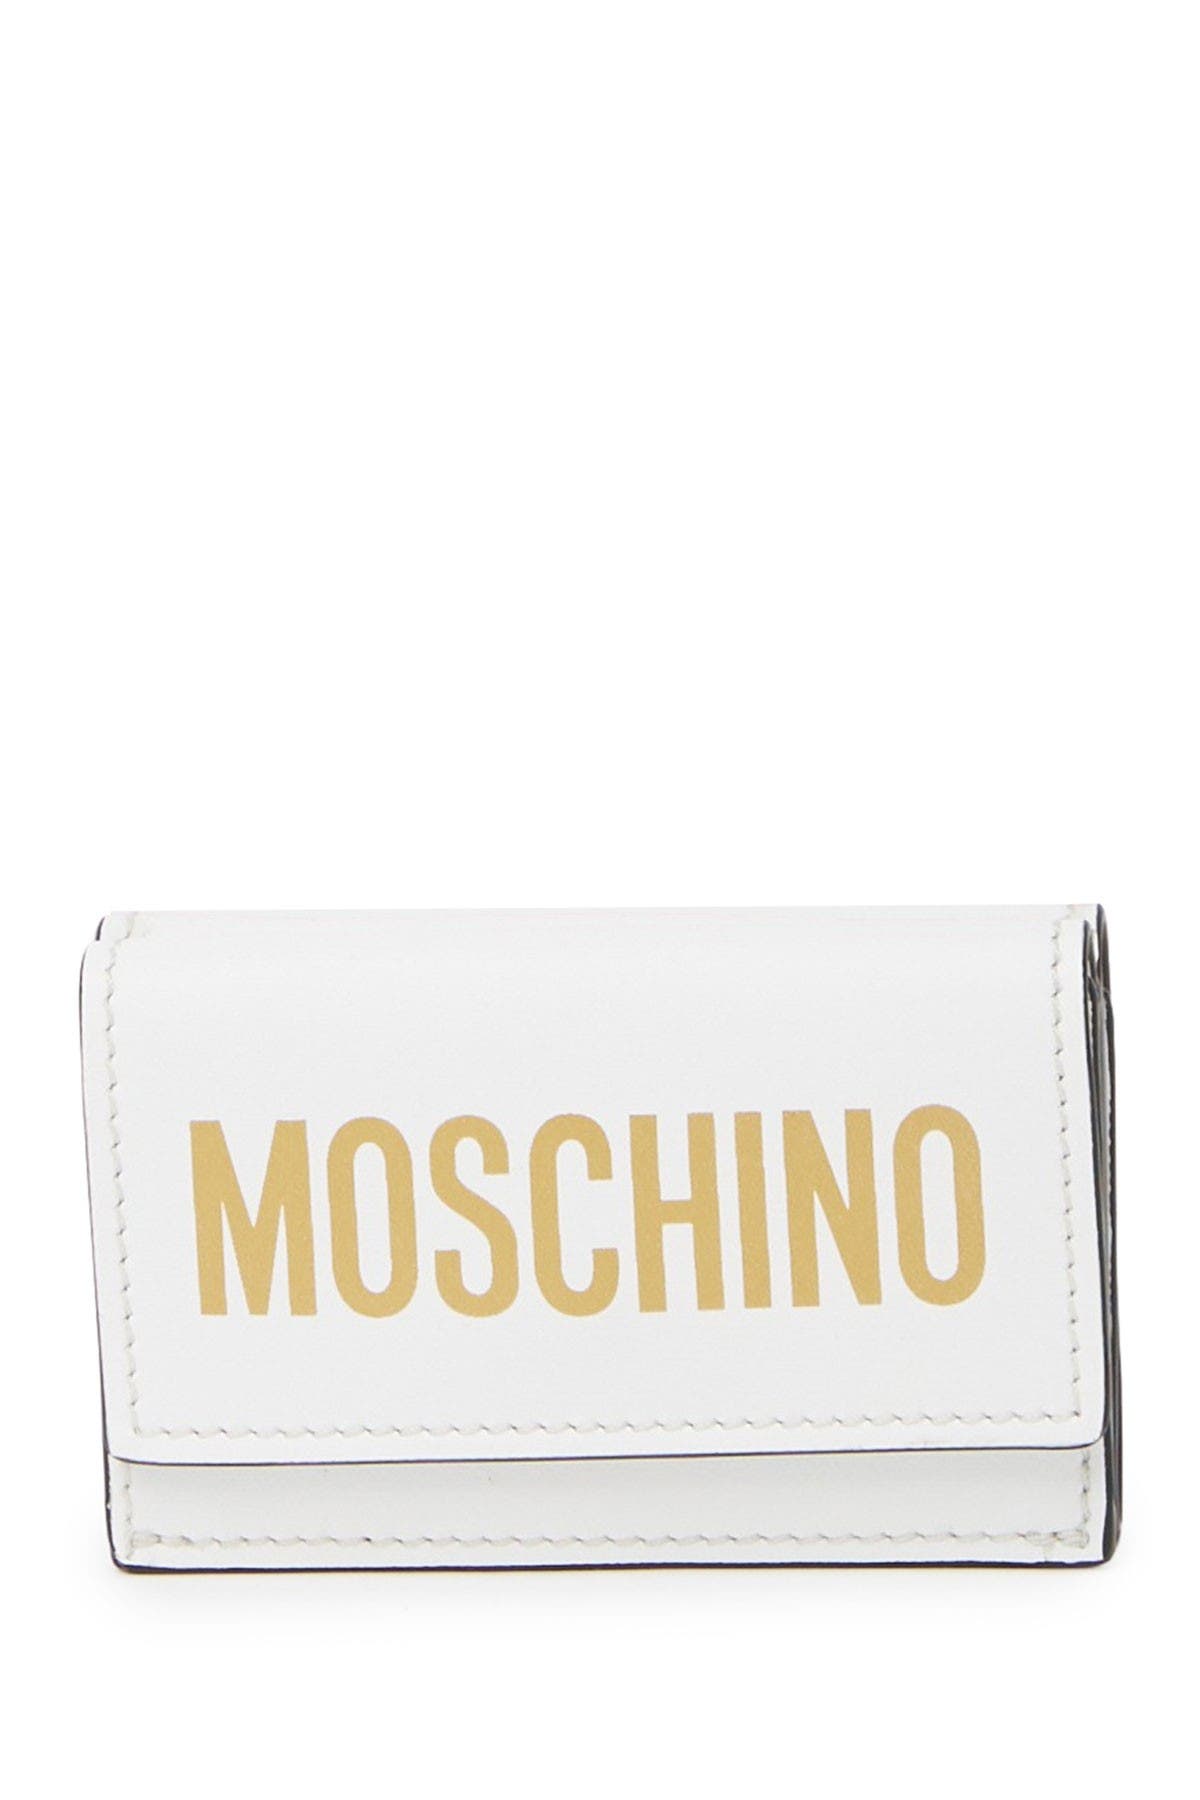 moschino leather wallet